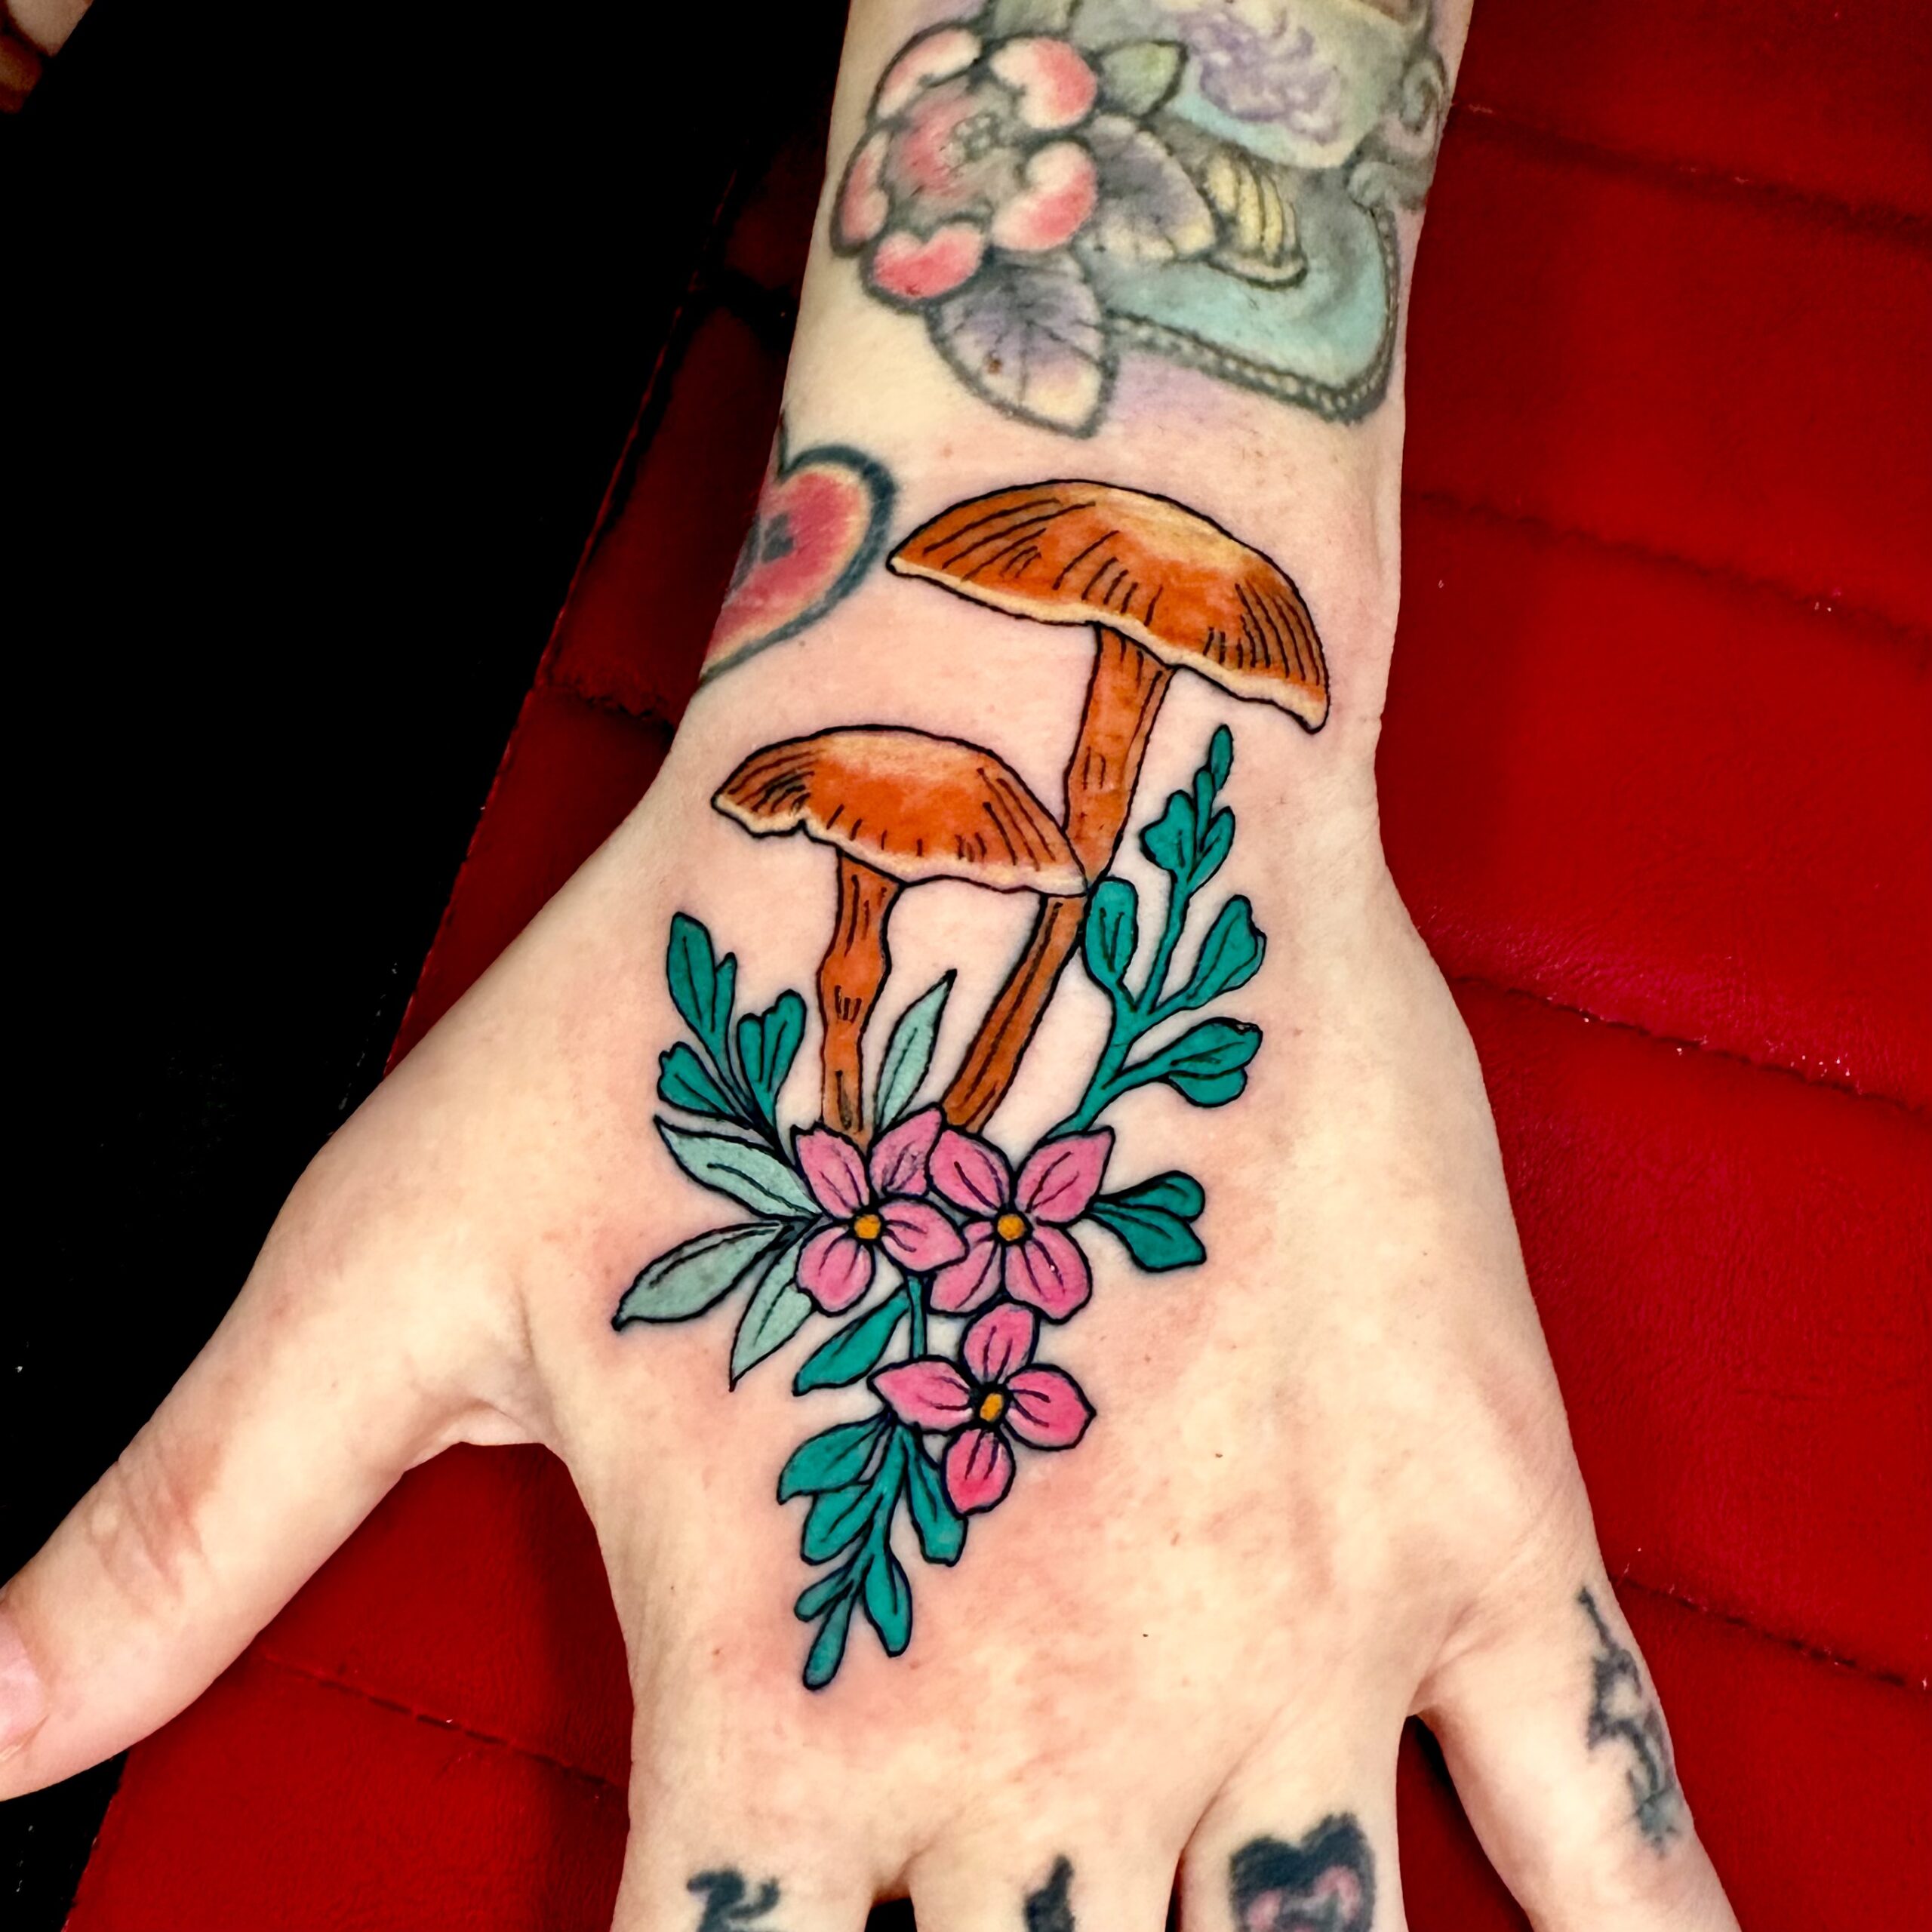 Colorful tattoo of mushrooms and flowers